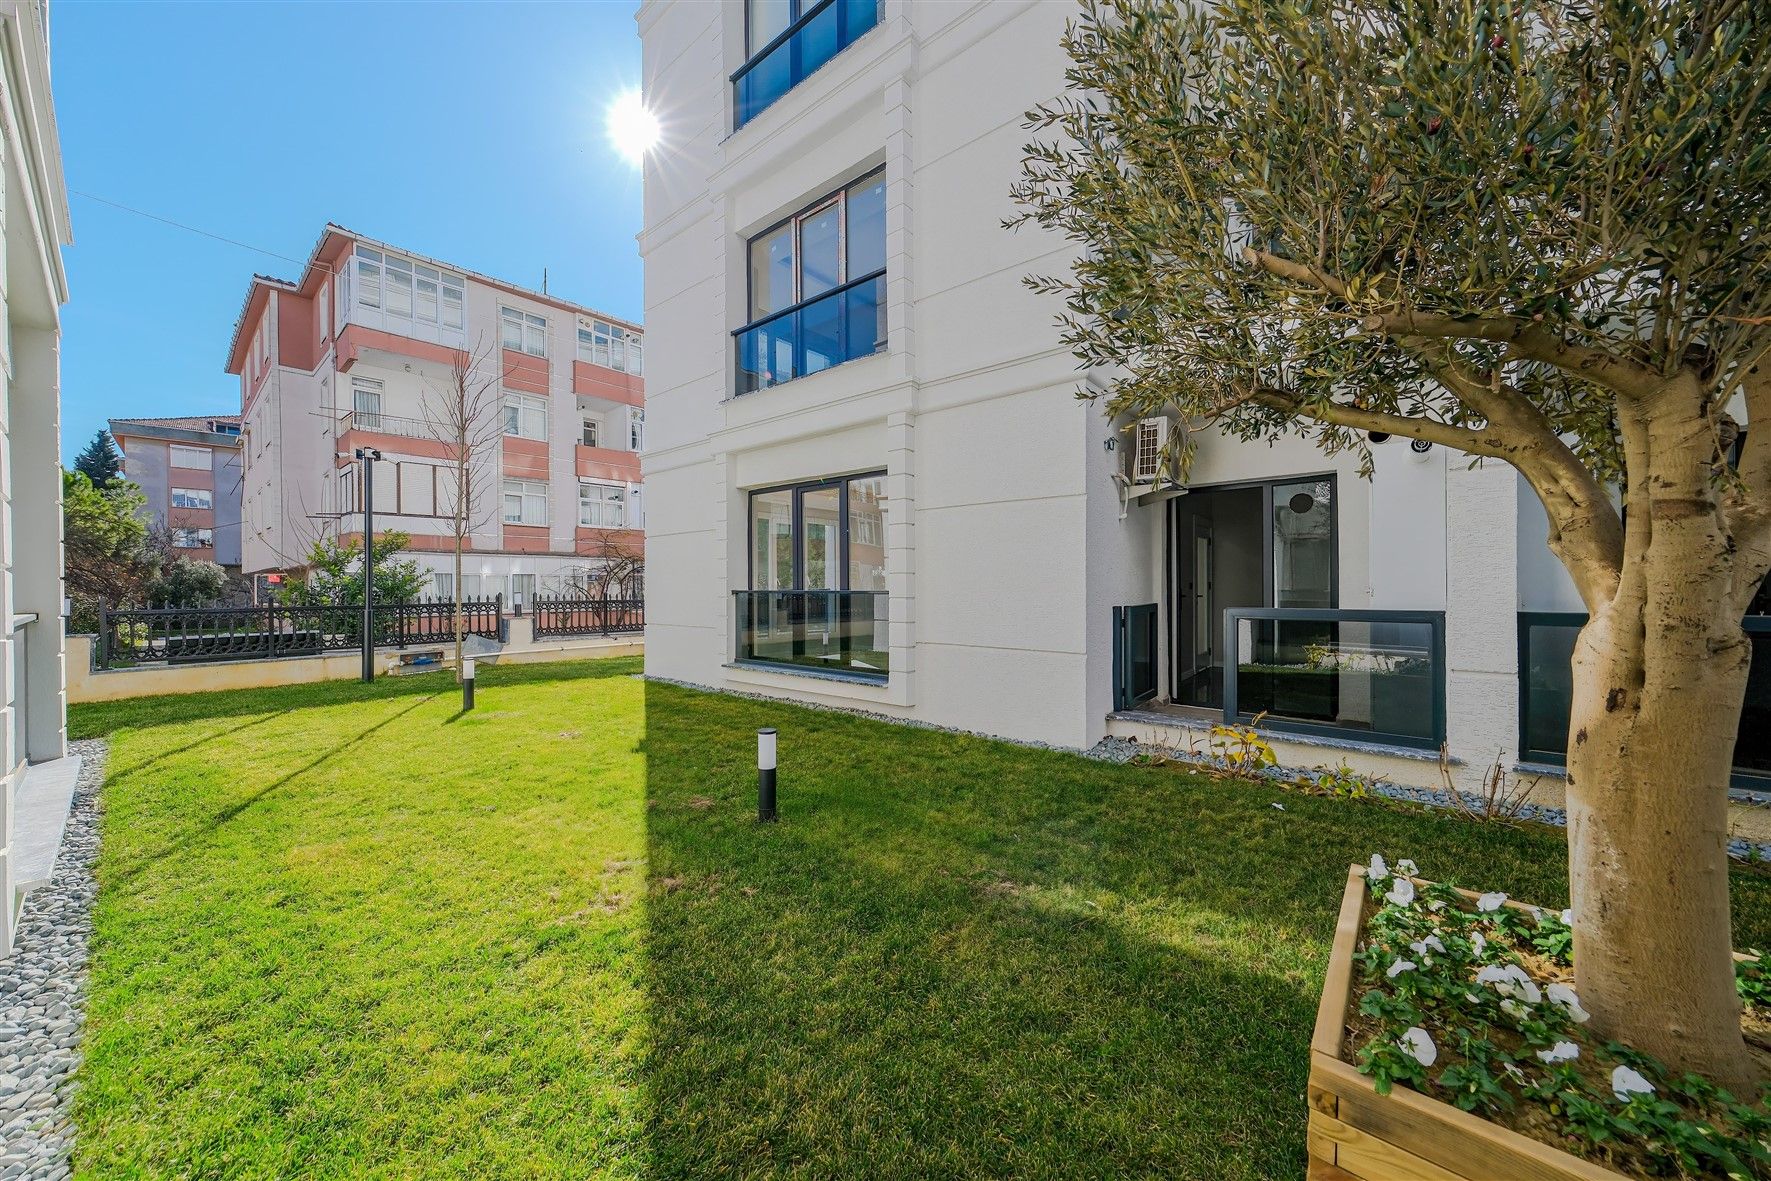 New bright apartments within walking distance from the Marmara Sea